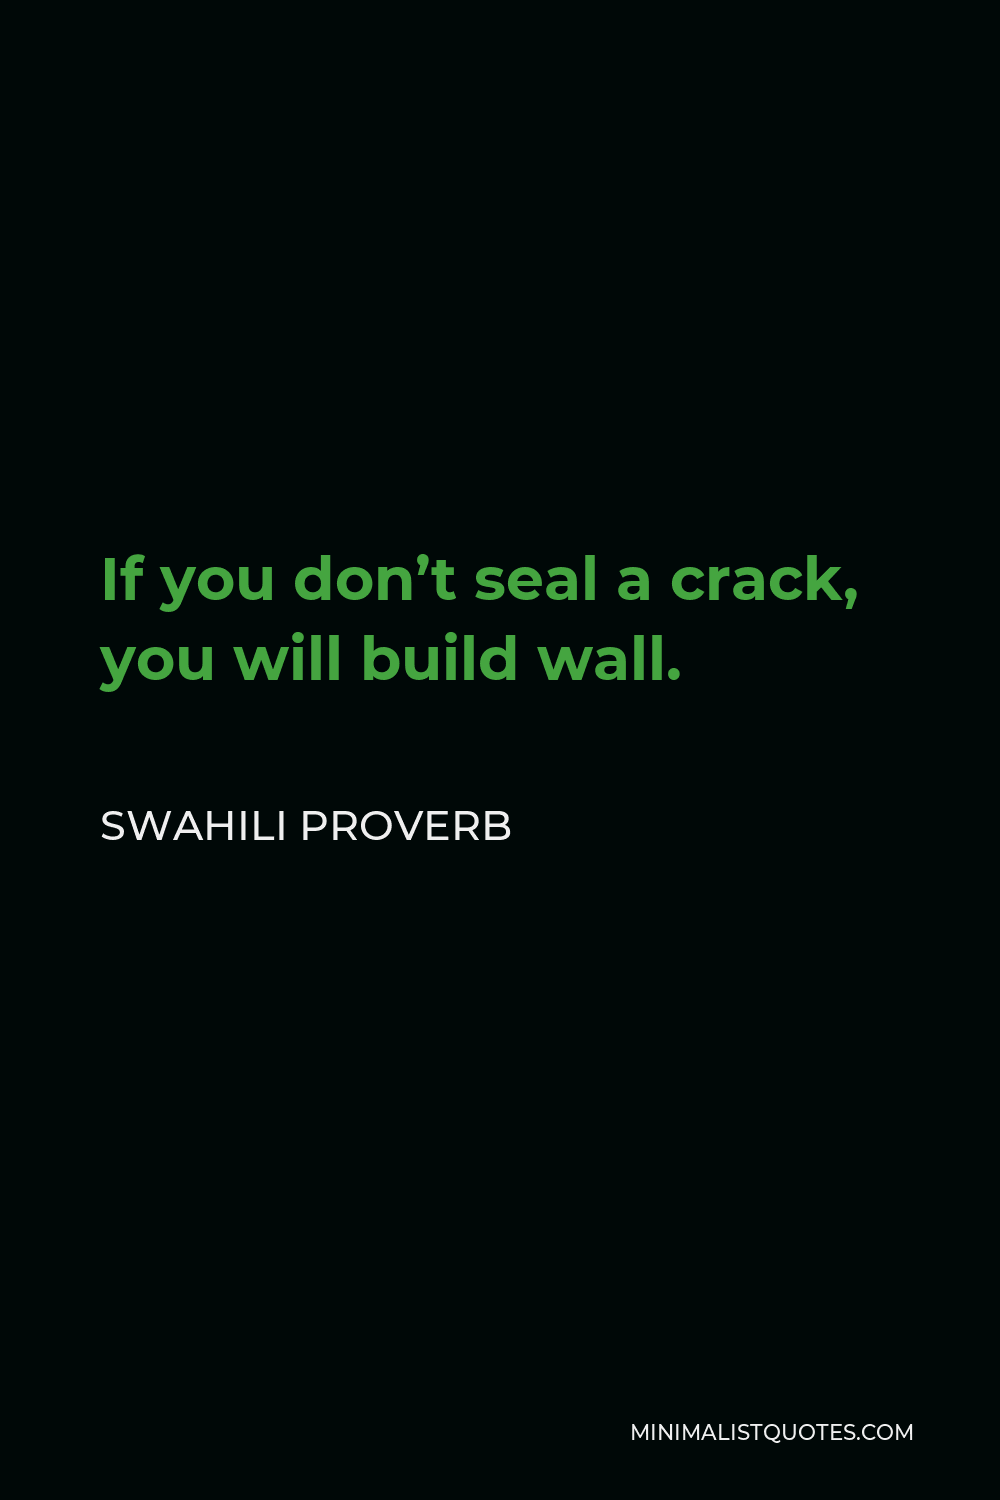 Swahili Proverb Quote - If you don’t seal a crack, you will build wall.